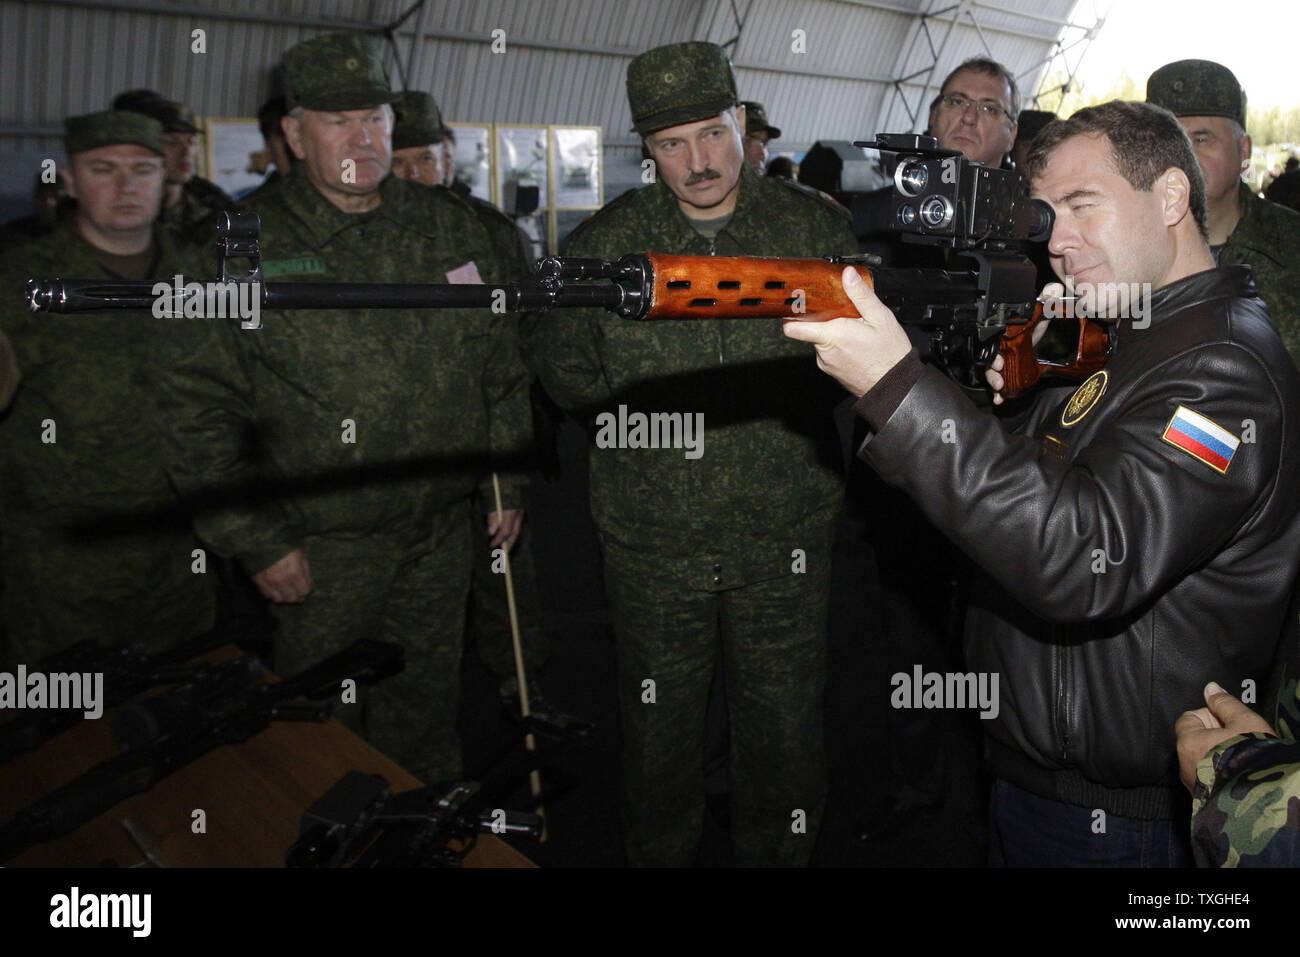 Russian President Dmitry Medvedev R Holds Examines A Sniper Rifle As Belorussian President Alexander Lukashenko C Looks On During The Final Stage Of Zapad 2009 West 2009 Russian Belarus Joint Military Exercises Near Brest